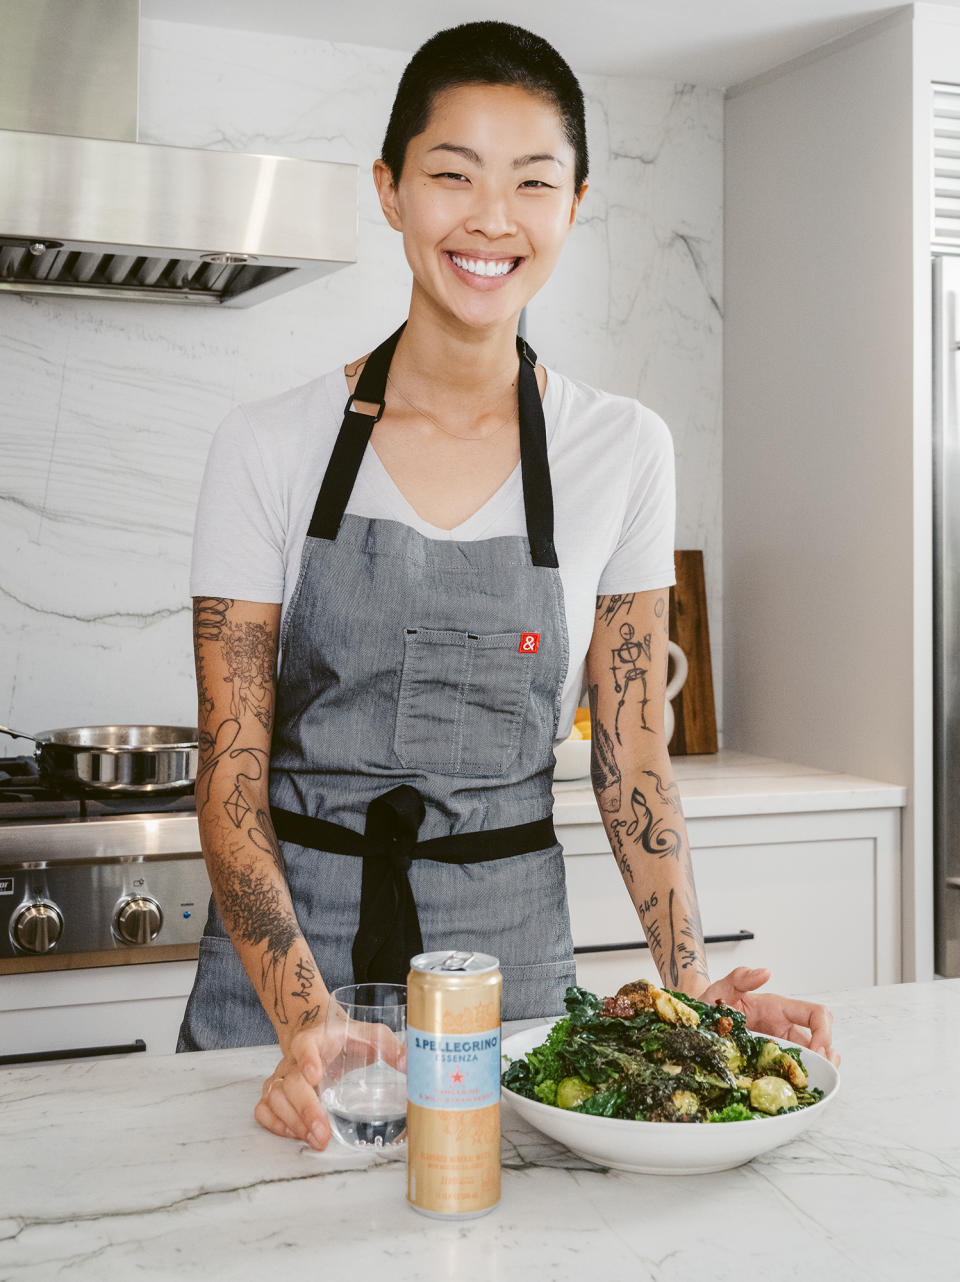 <p><em>Top Chef</em> star Kristen Kish shares her inner circle's best recipes and tips on how you can make them at home in a new video series, <em>Our Food, Our Stories</em>, with S.Pellegrino.</p>